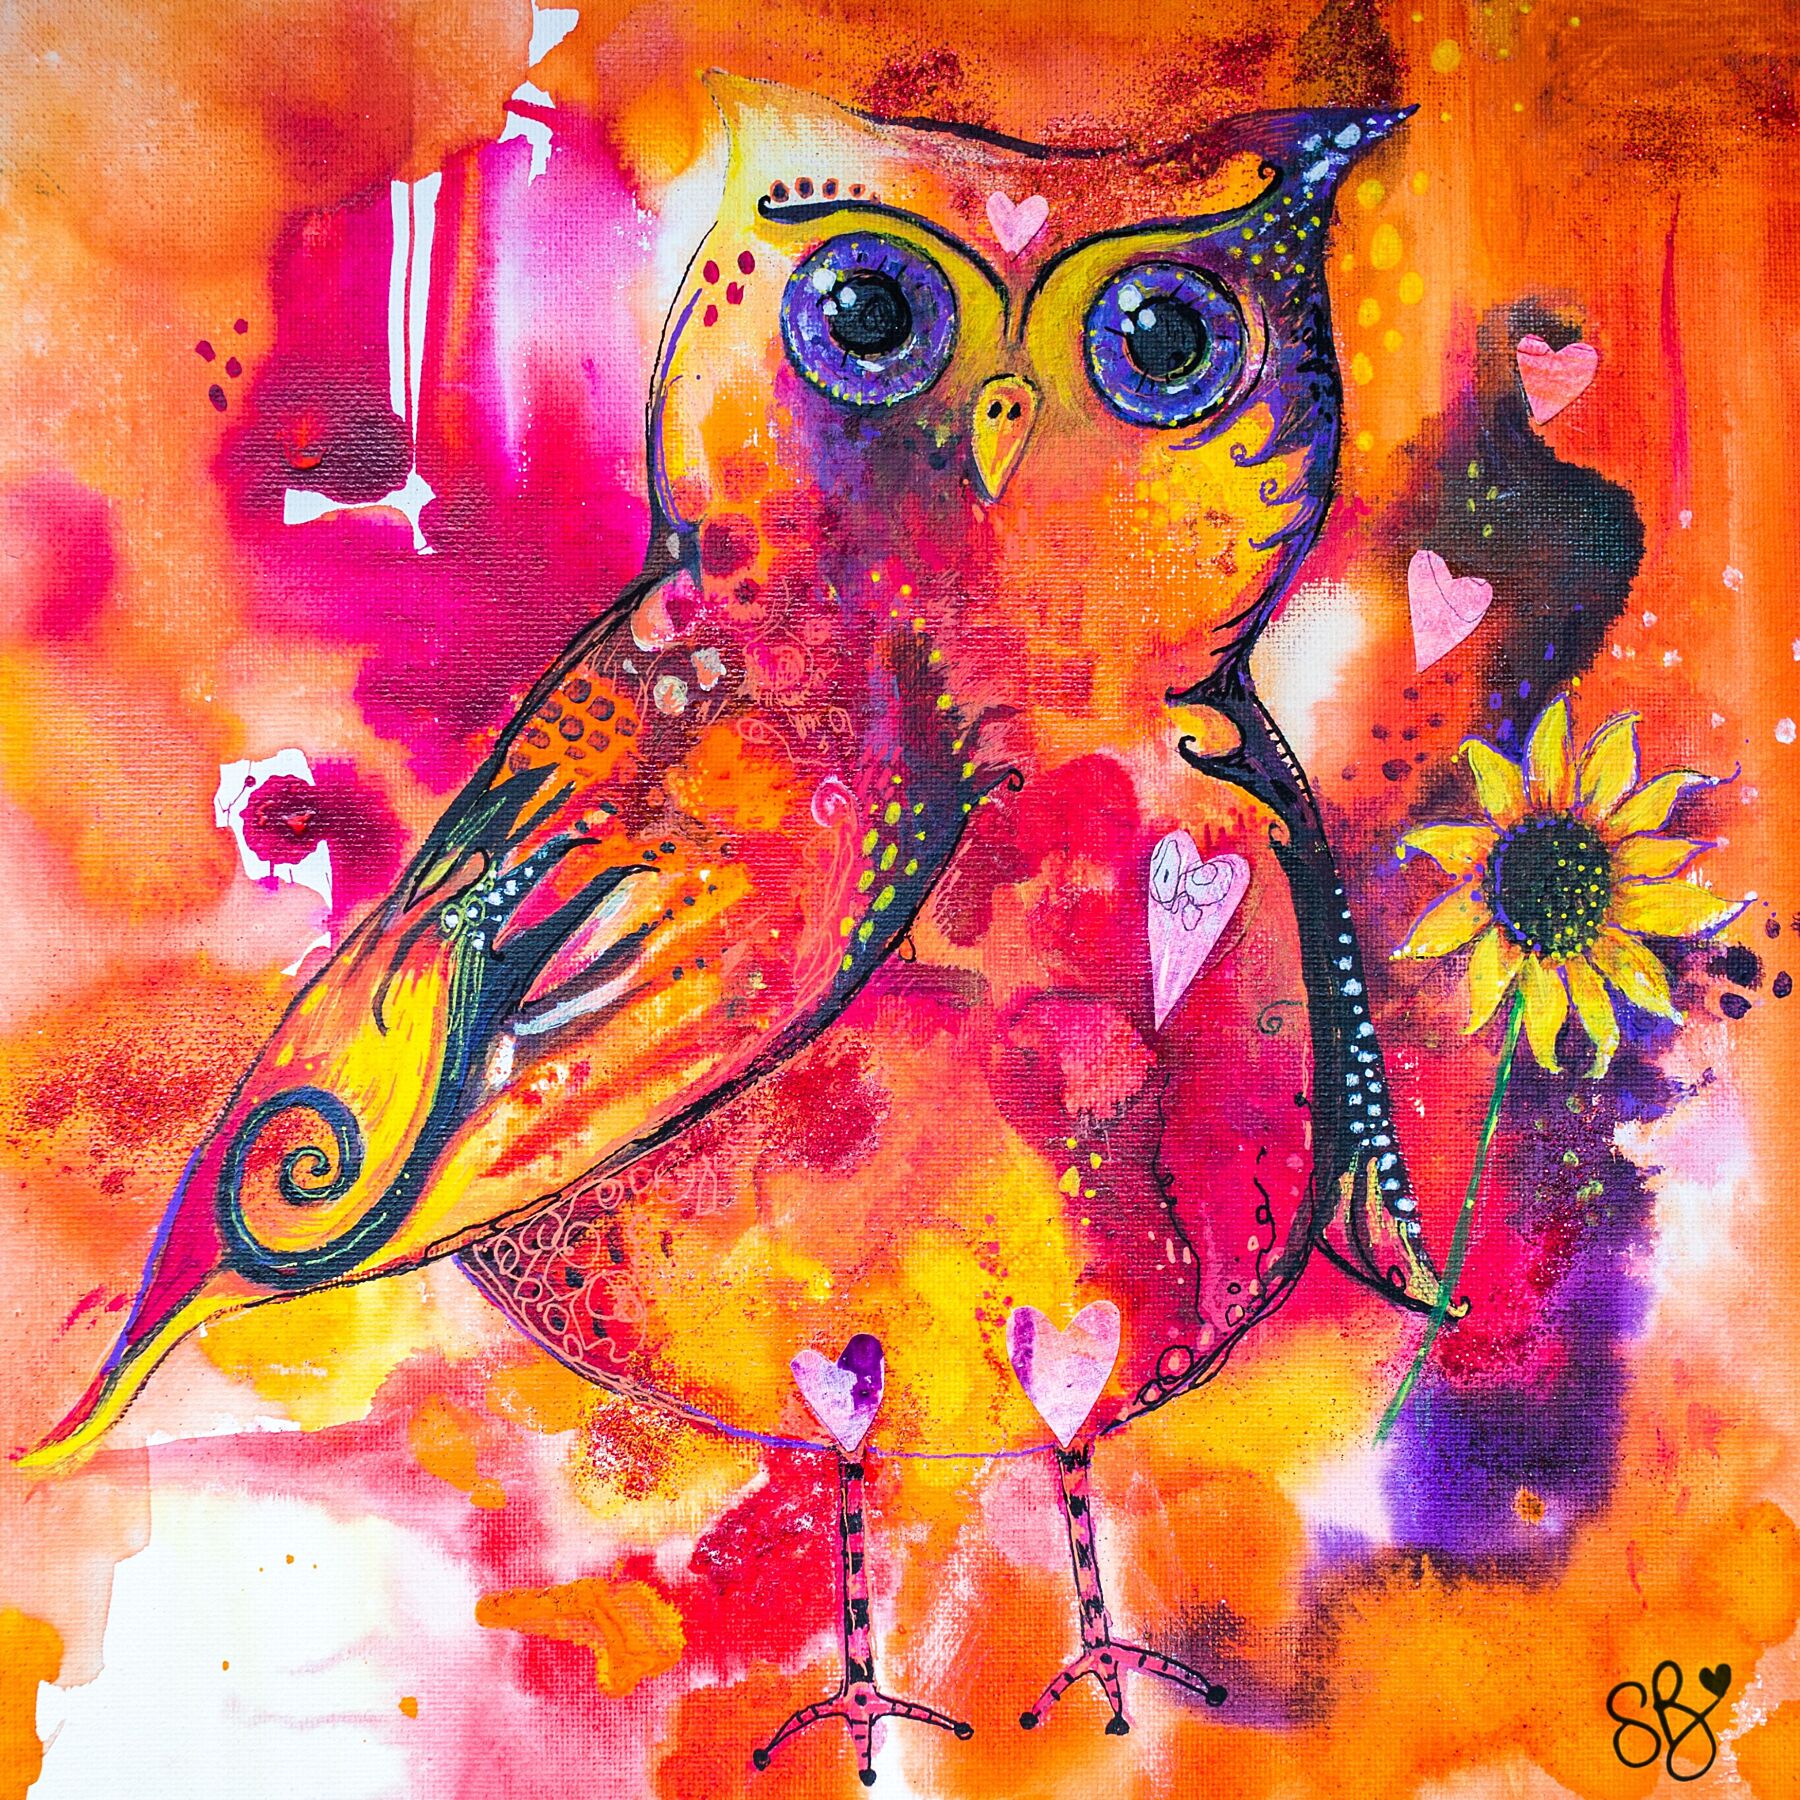 Owl Print - Fire Spirit Owl is a a whimsical and fun owl painted in fiery tones of pink, red, orange and yellow. She holds a sunflower in her wing.